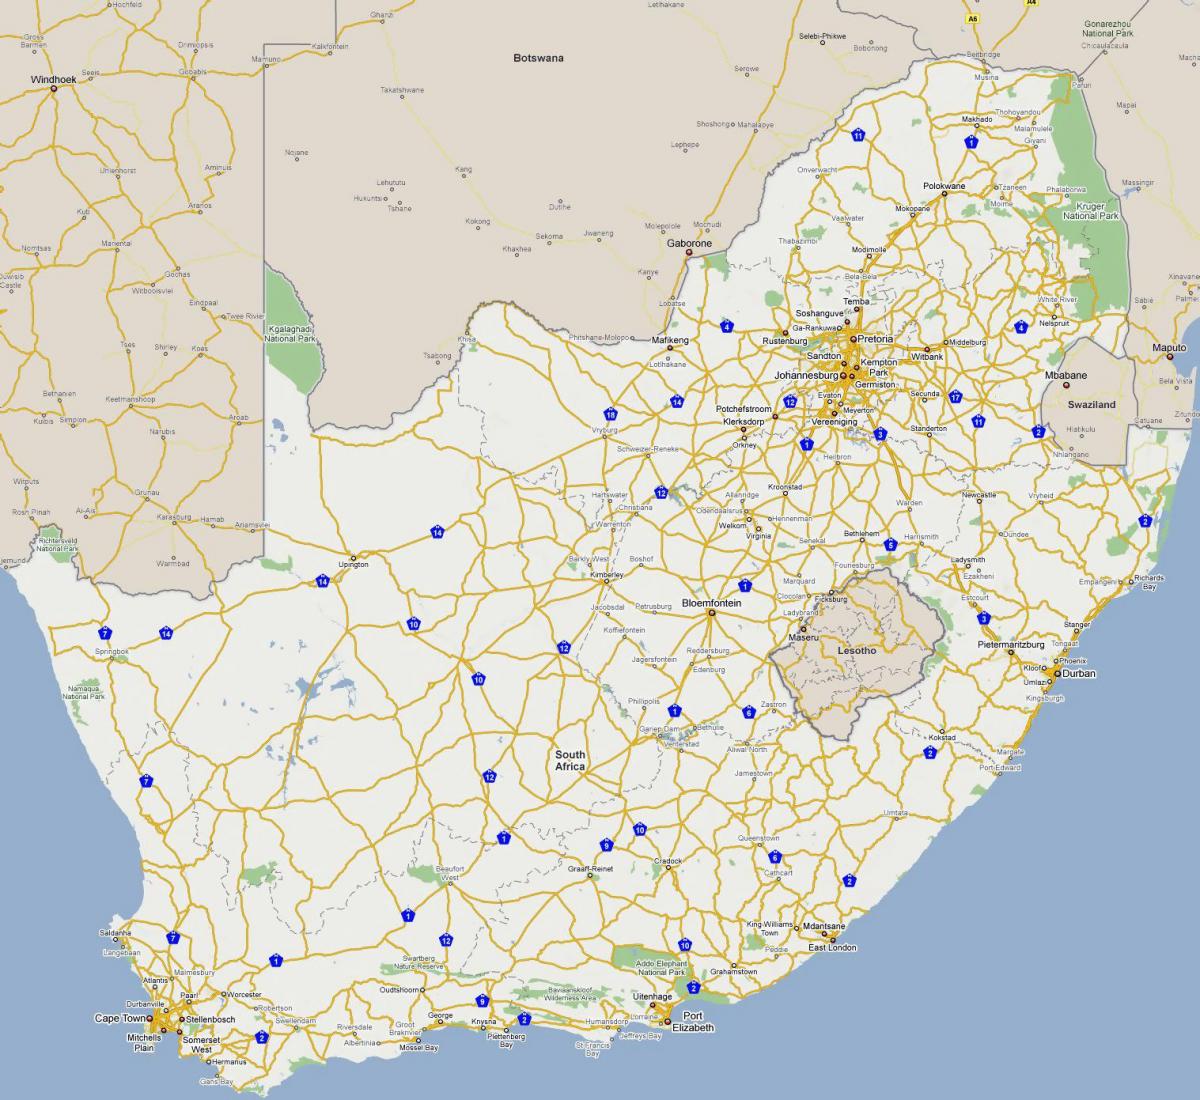 Motorway map of South Africa